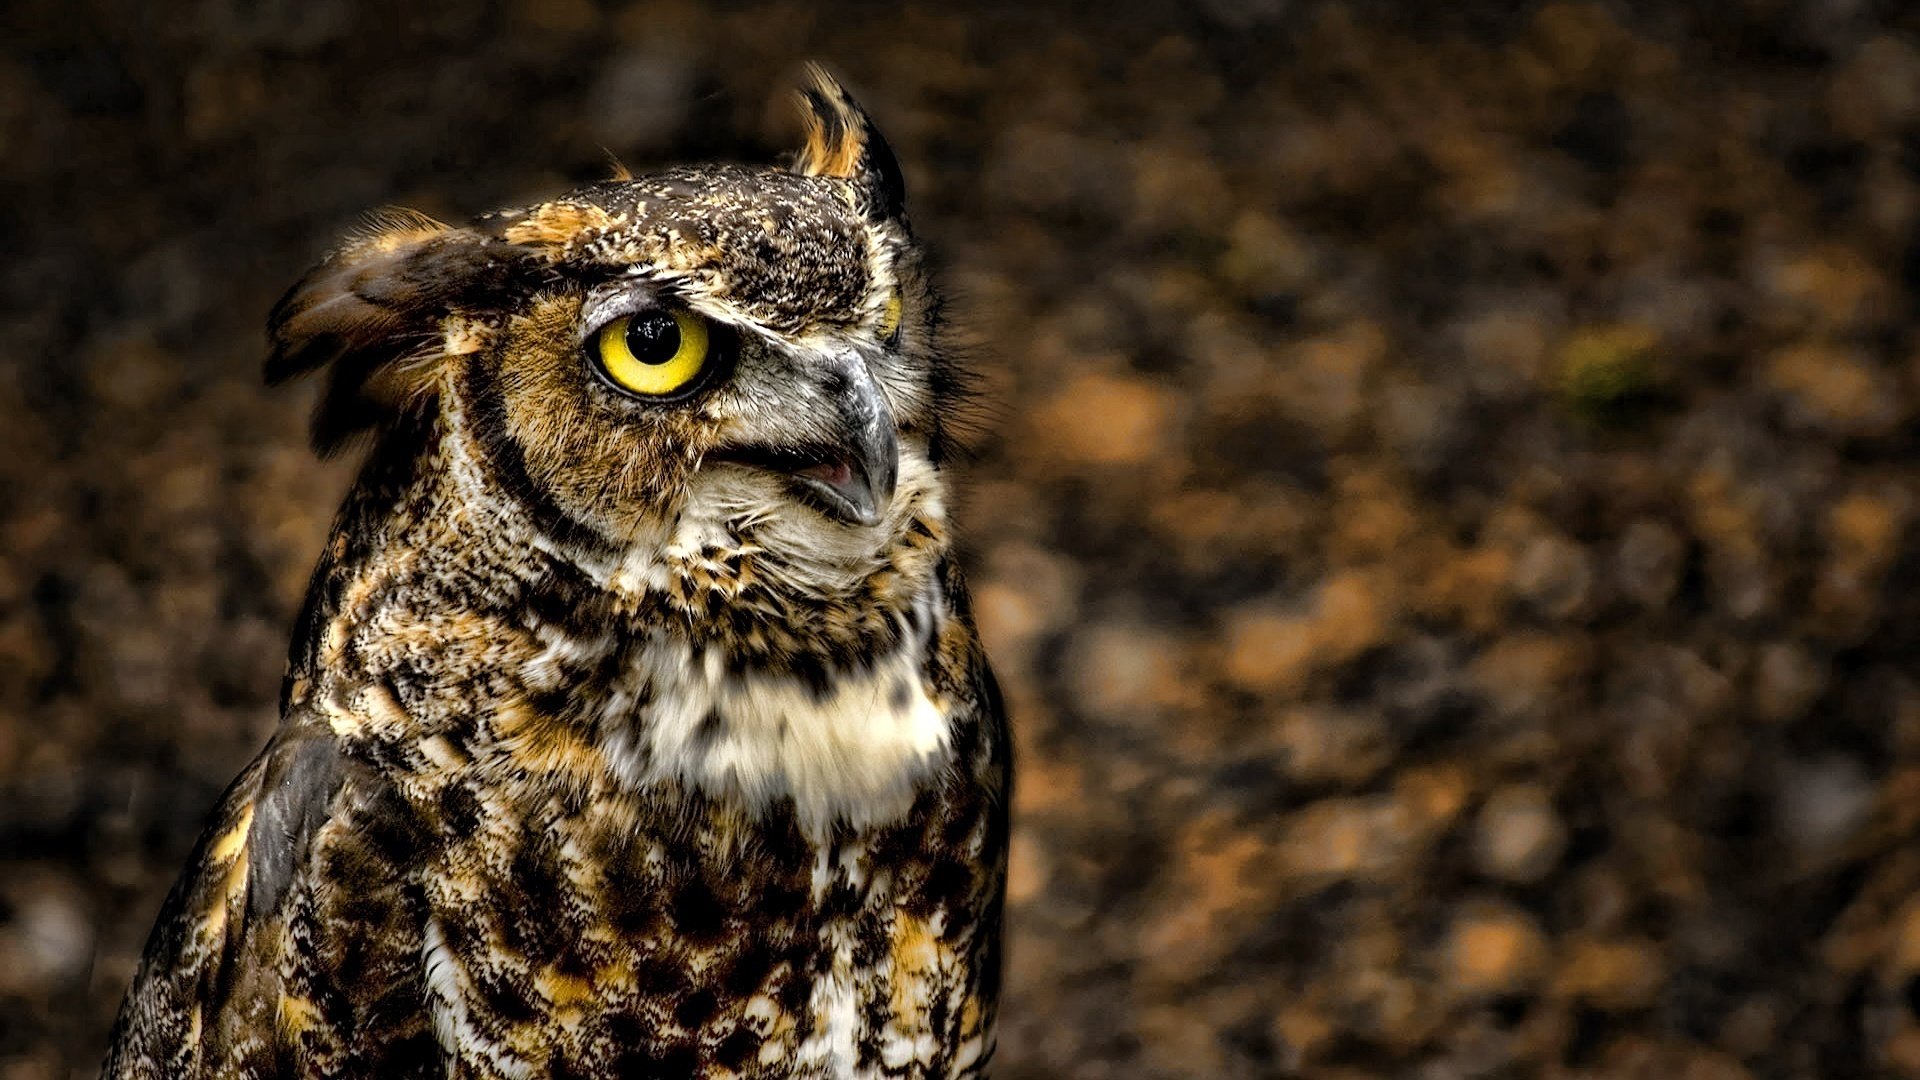 Download full hd 1920x1080 Great Horned Owl PC background ID:297776 for free